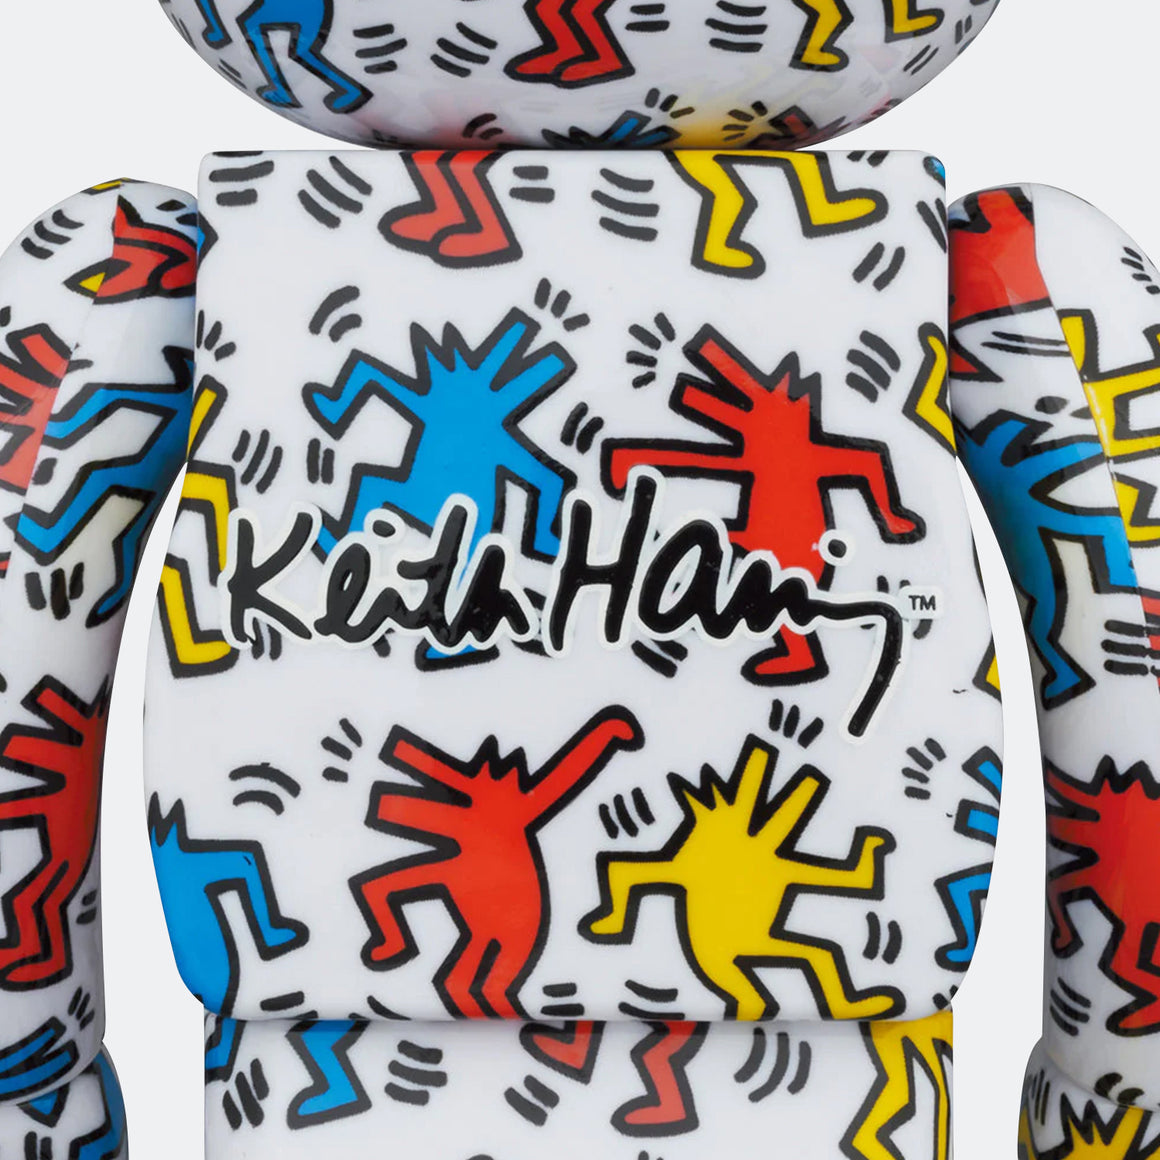 Medicom Toy - Be@rbrick 400% Set - Keith Haring #9 - UP THERE